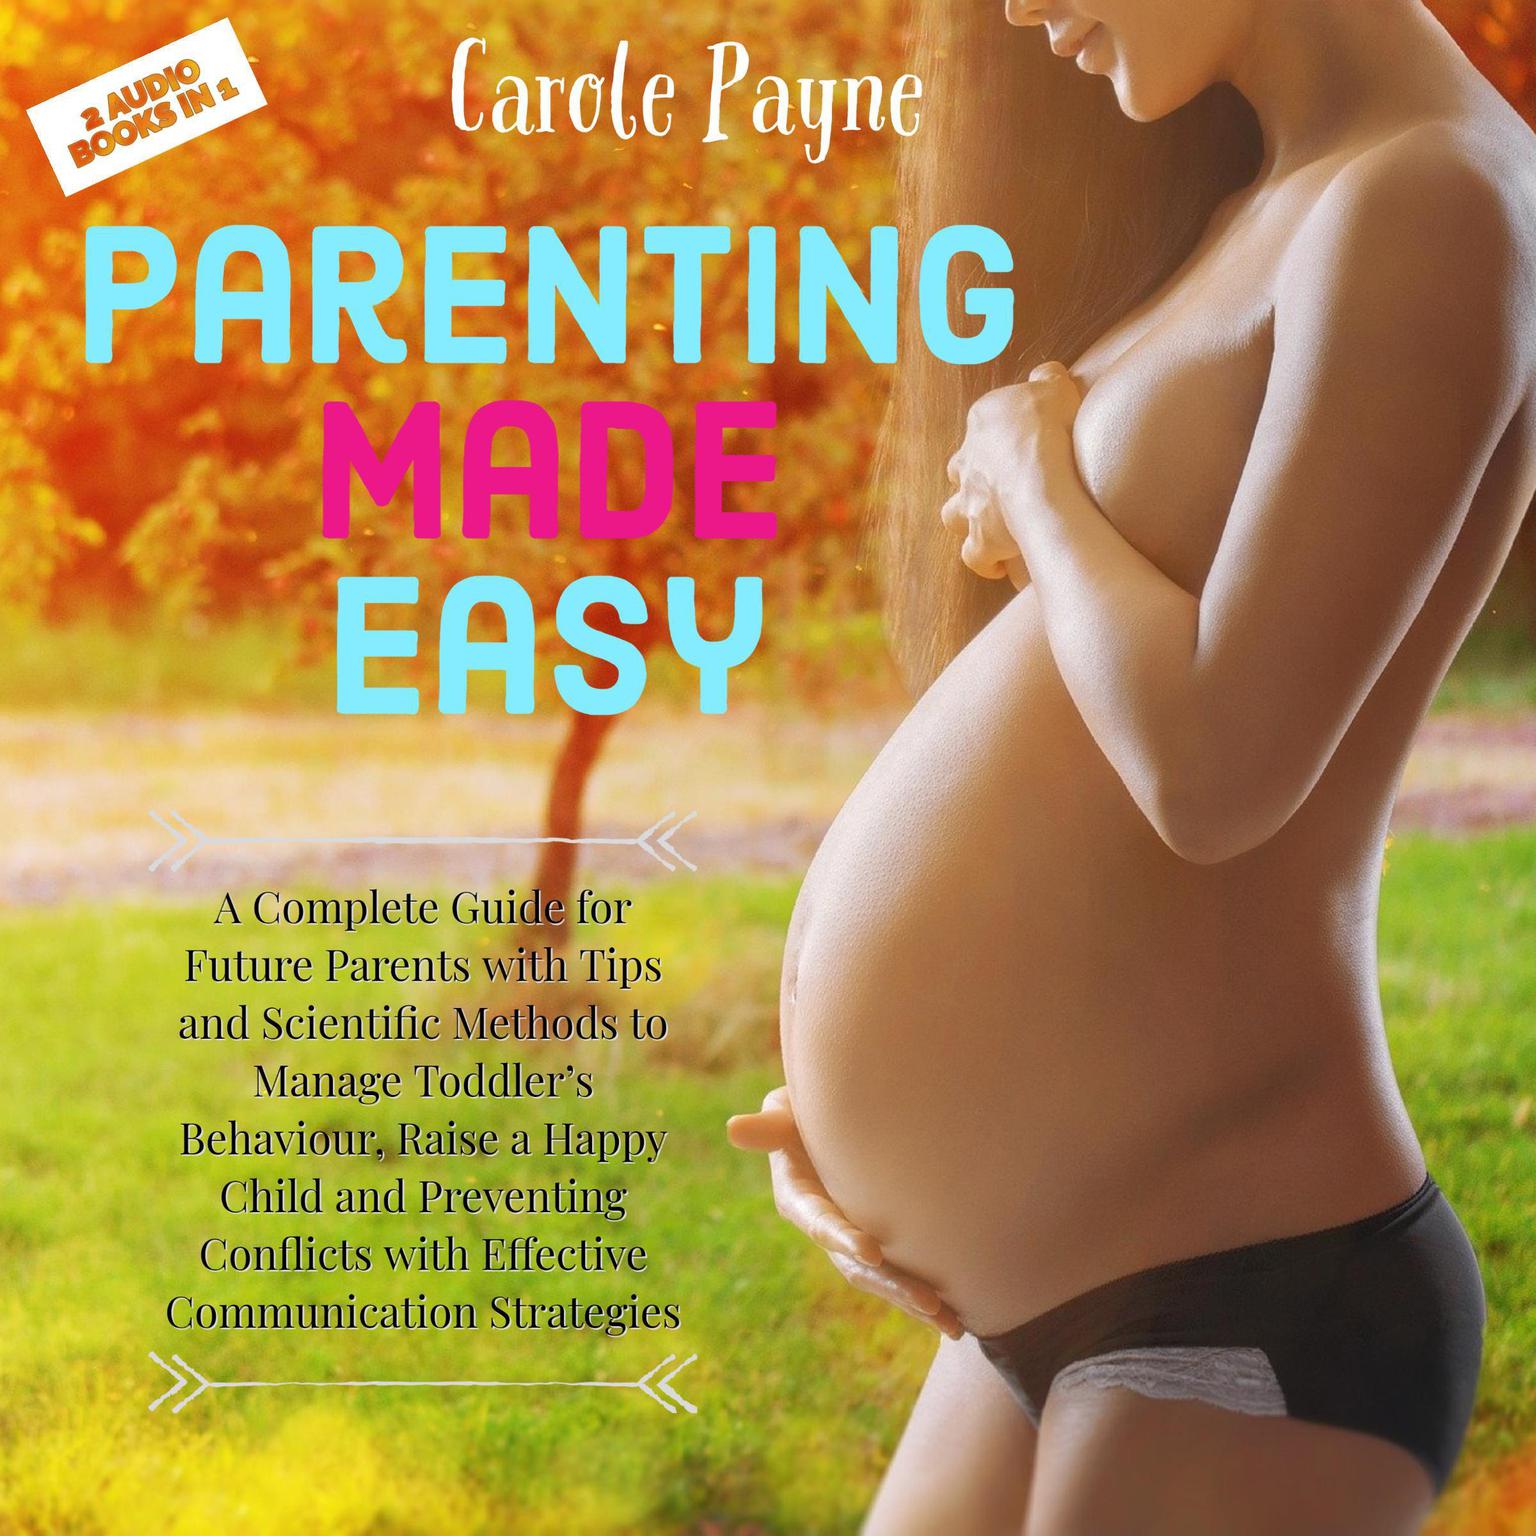 Parenting Made Easy: A Complete Guide for Future Parents with Tips and Scientific Methods to Manage Toddler’s Behaviour, Raise a Happy Child and Preventing Conflicts with Effective Communication Strategies Audiobook, by Carole Payne